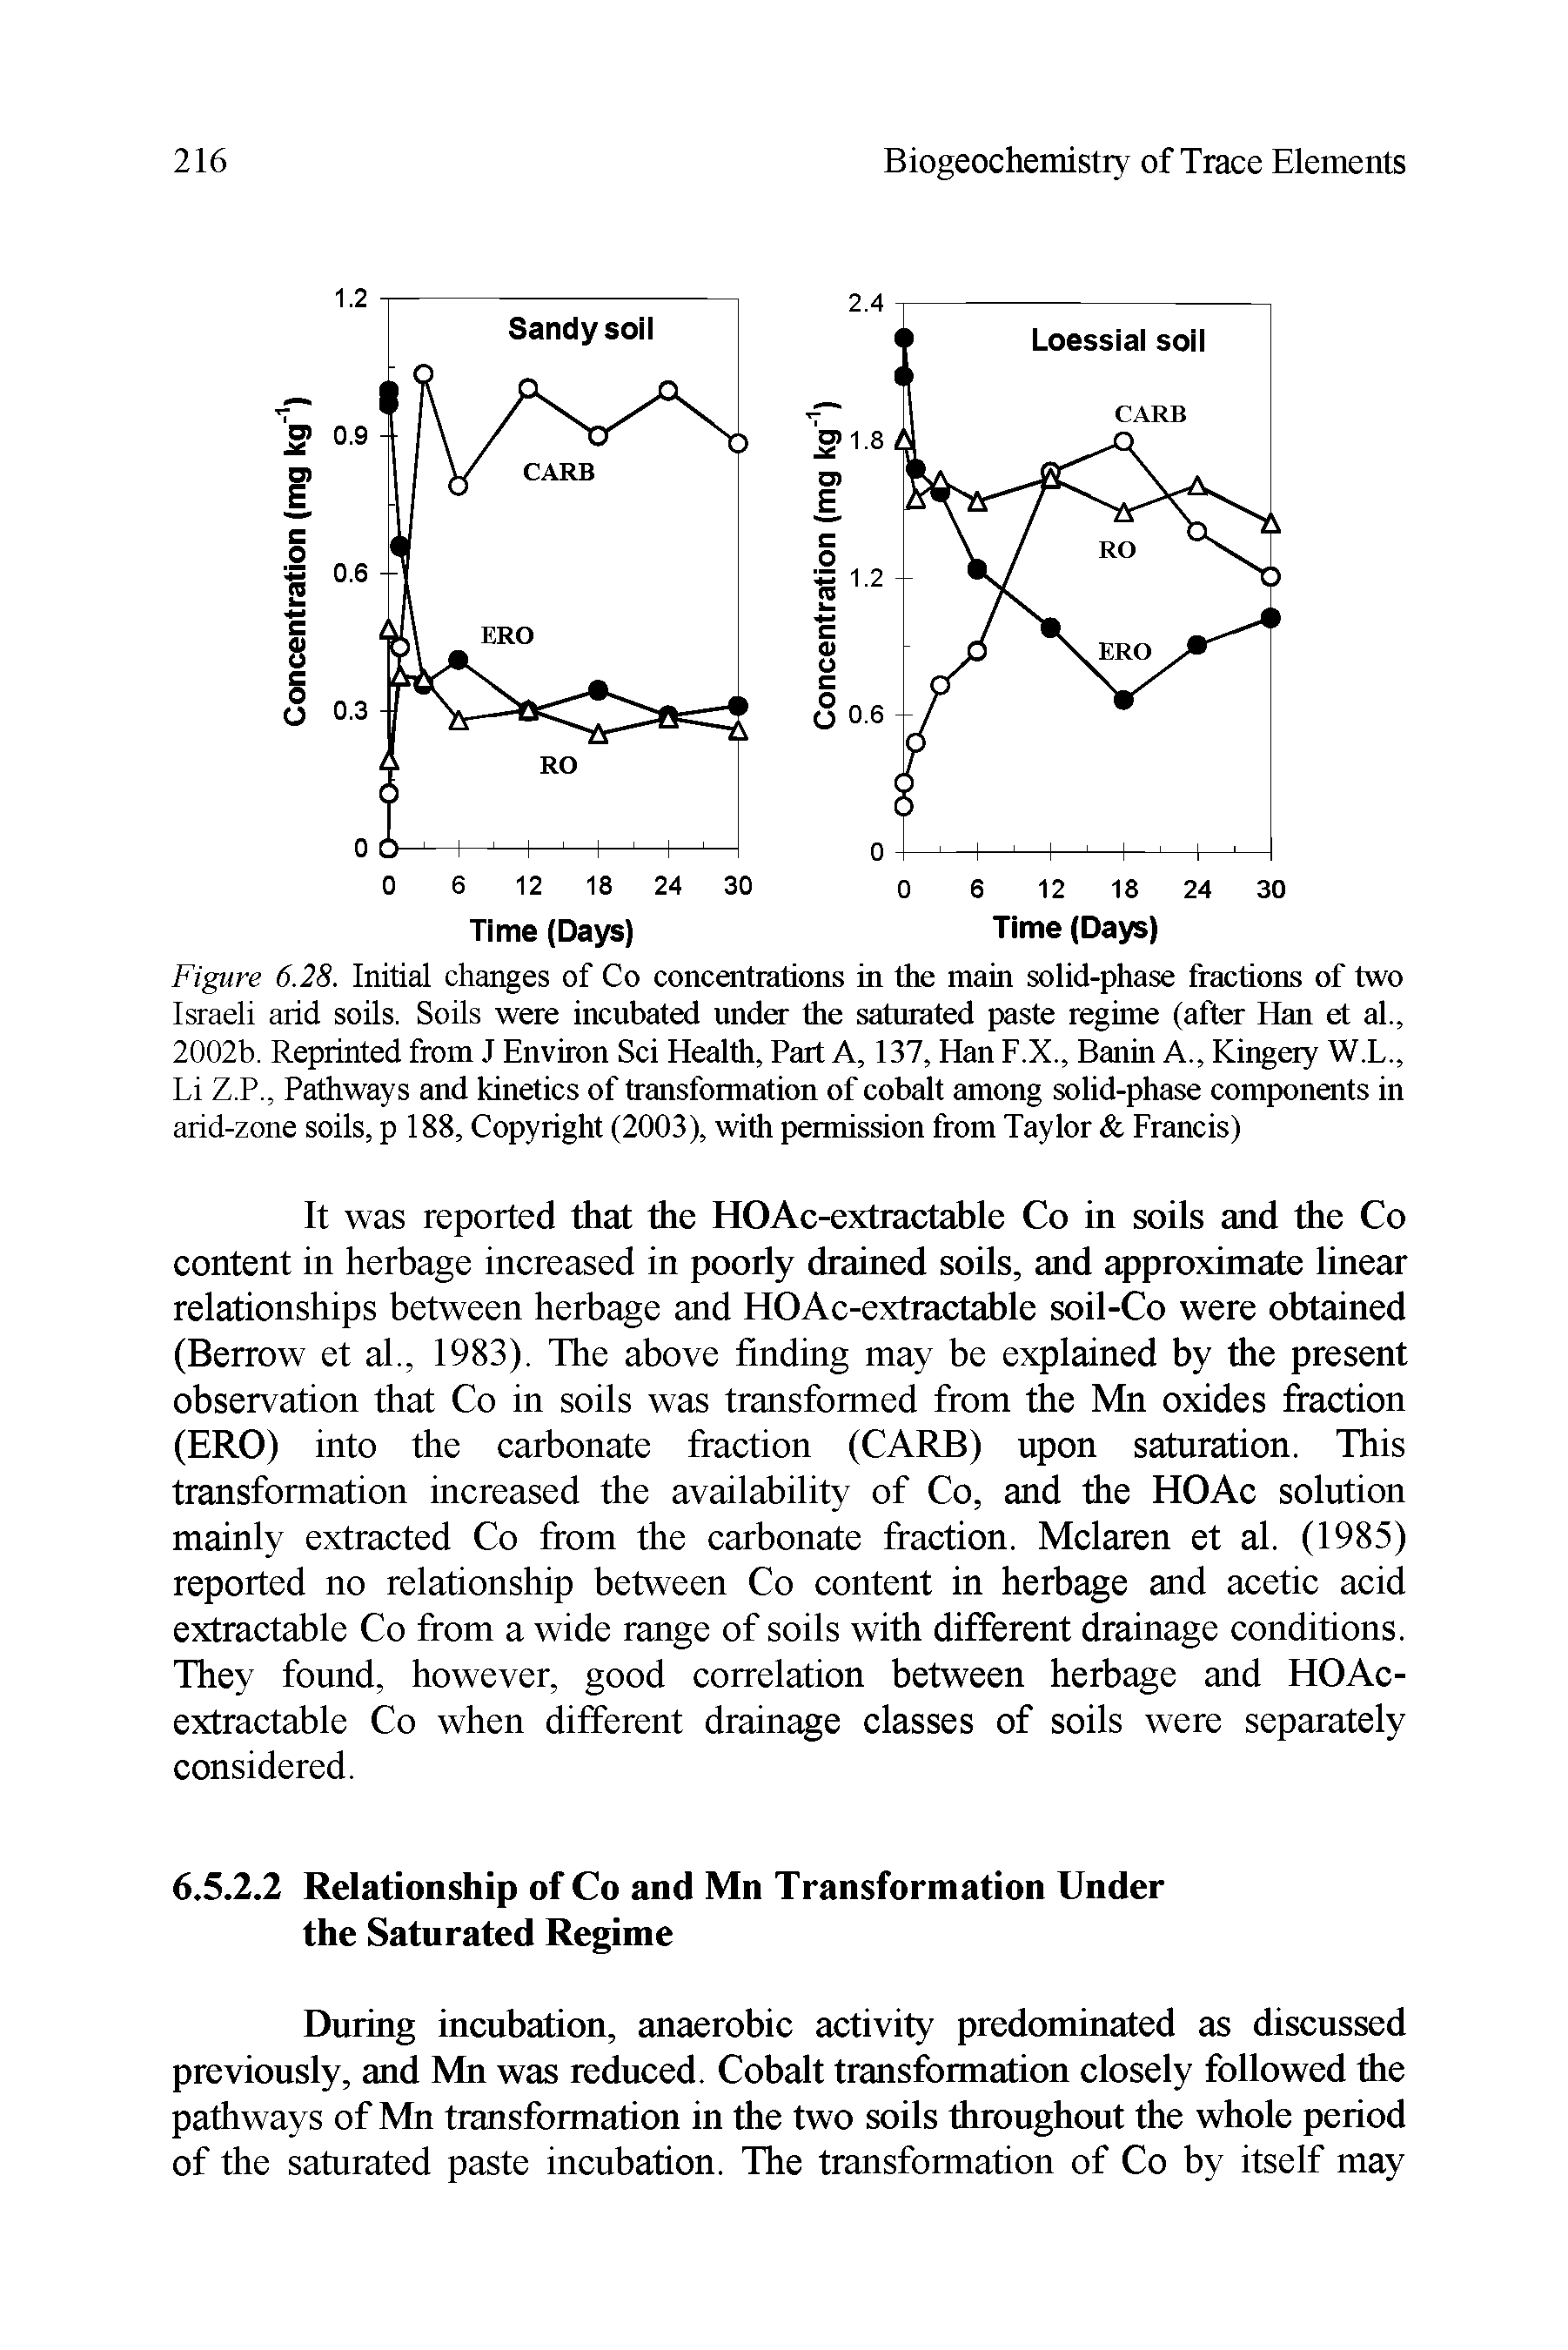 Figure 6.28. Initial changes of Co concentrations in the main solid-phase fractions of two Israeli arid soils. Soils were incubated under the saturated paste regime (after Han et al., 2002b. Reprinted from J Environ Sci Health, Part A, 137, Han F.X., Banin A., Kingery W.L., Li Z.P., Pathways and kinetics of transformation of cobalt among solid-phase components in arid-zone soils, p 188, Copyright (2003), with permission from Taylor Francis)...